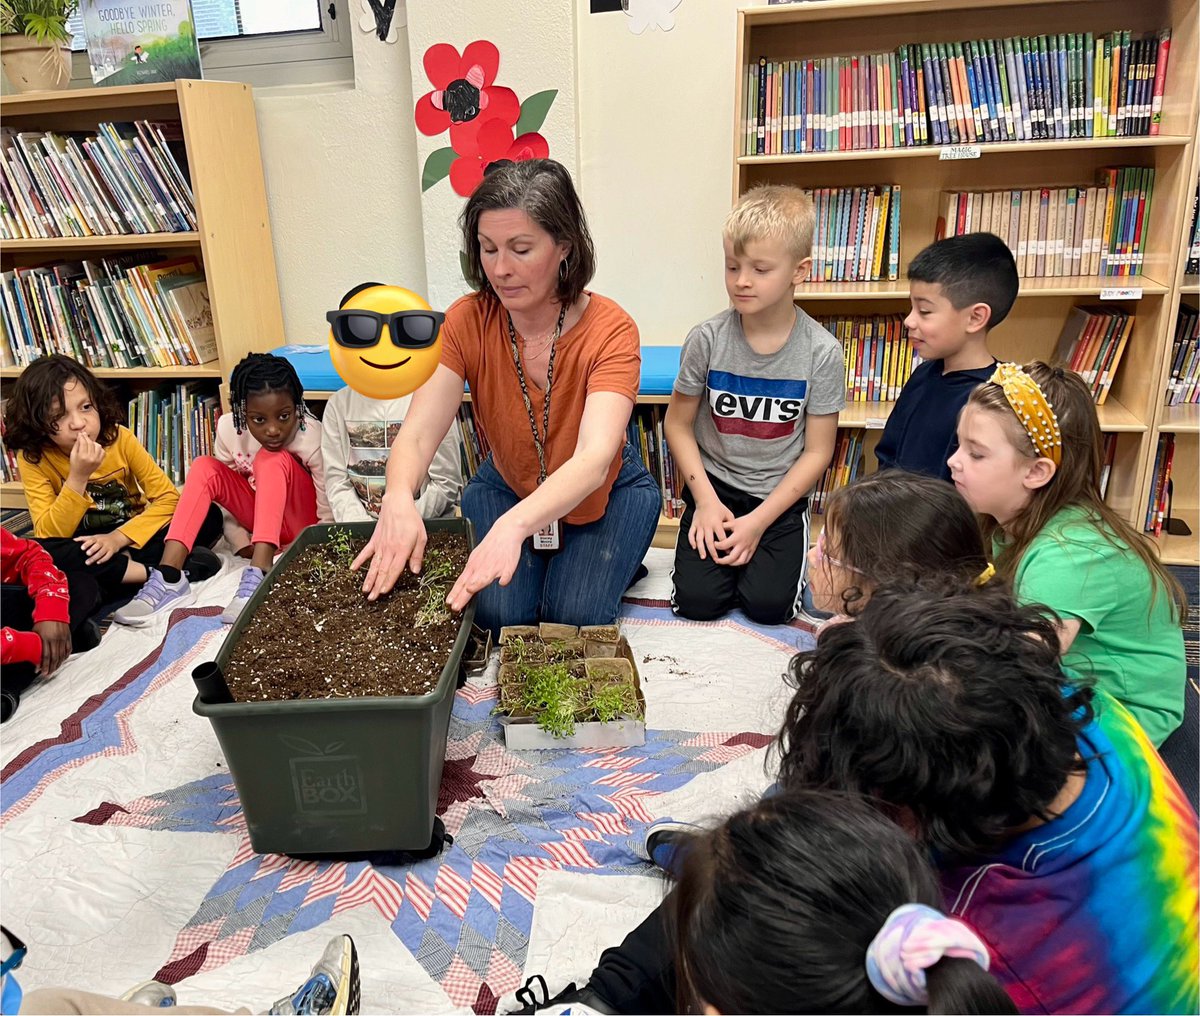 Happy Librarians Day to our own awesome librarian with the green thumbs! We love you, Ms. Moore! @MuziLearningLab